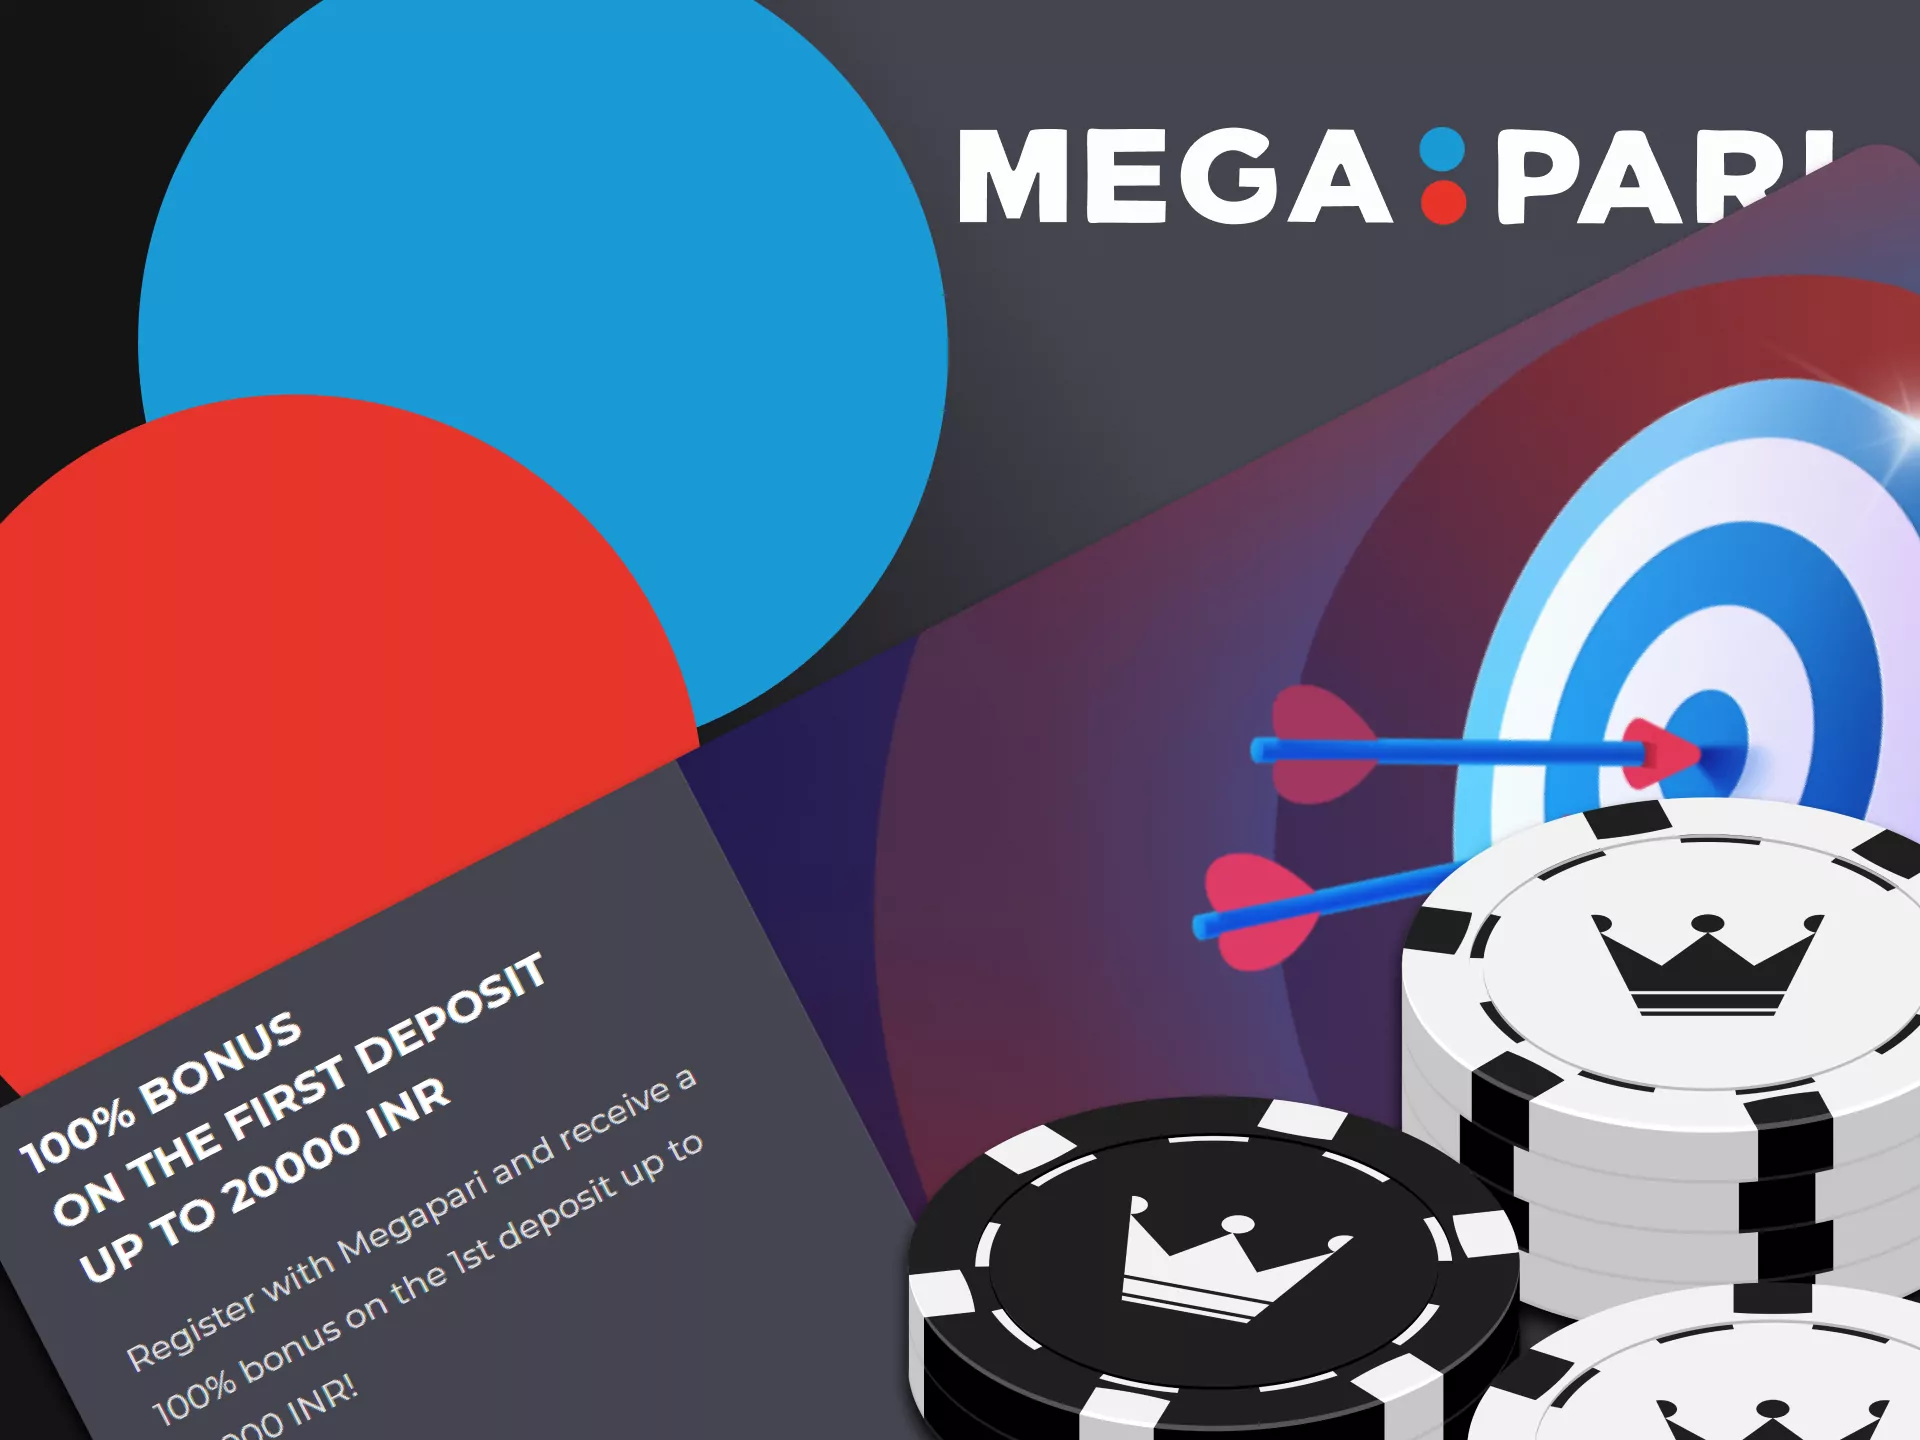 Get a welcome bonus for playing bingo from Megapari.